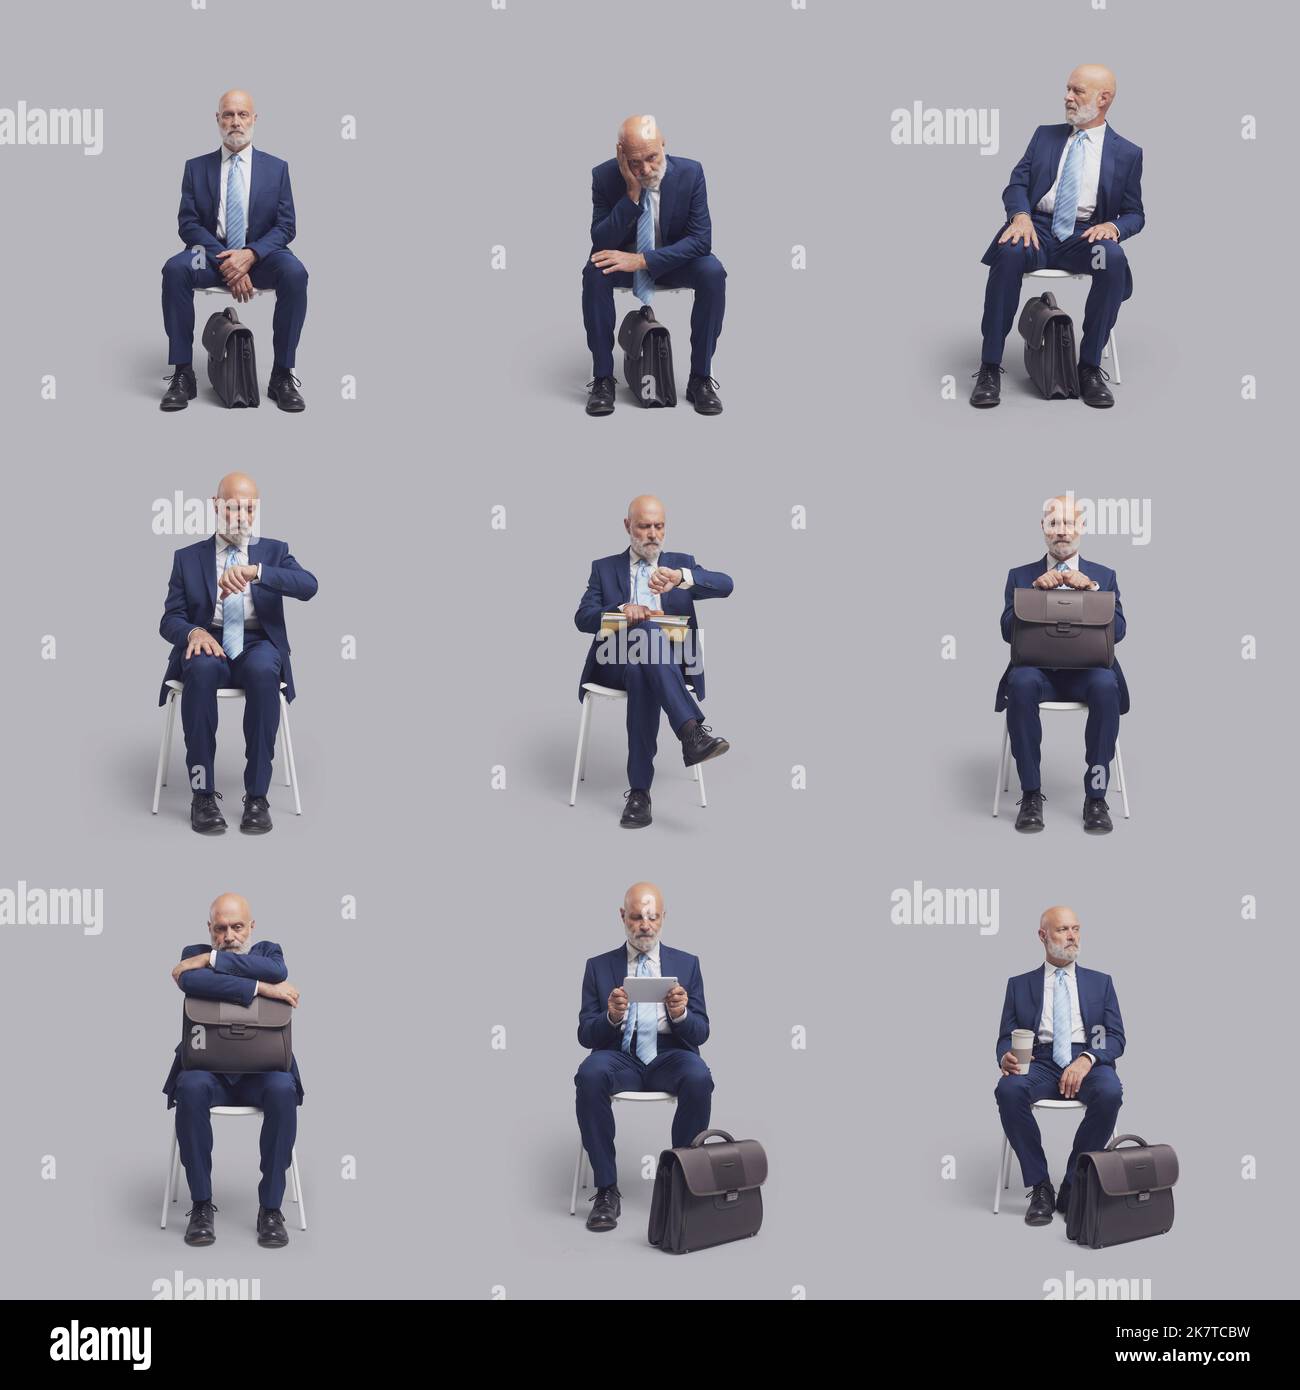 Corporate businessman sitting on a chair and waiting for a job interview, set of portraits collage Stock Photo